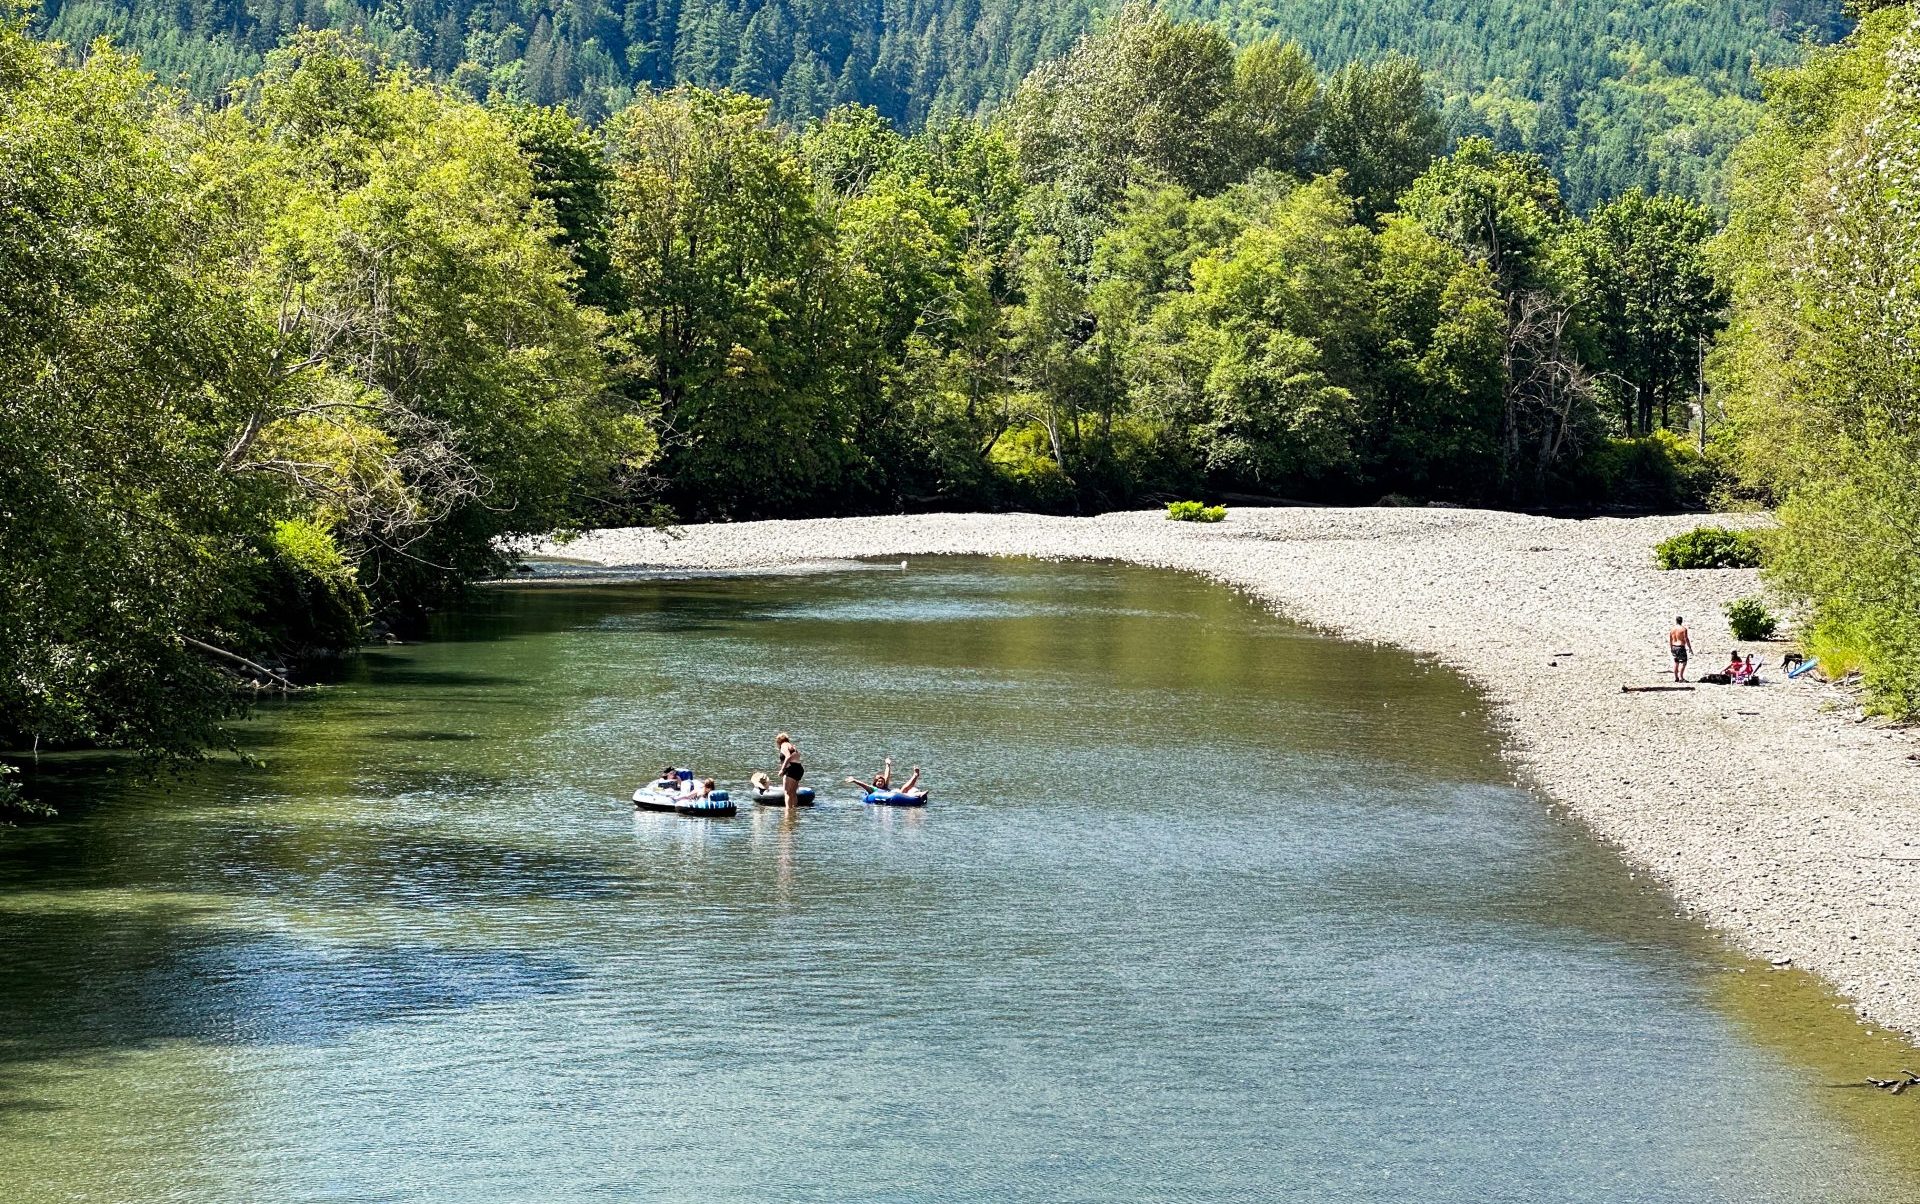 Floating ban put in place to protect Nooksack River salmon